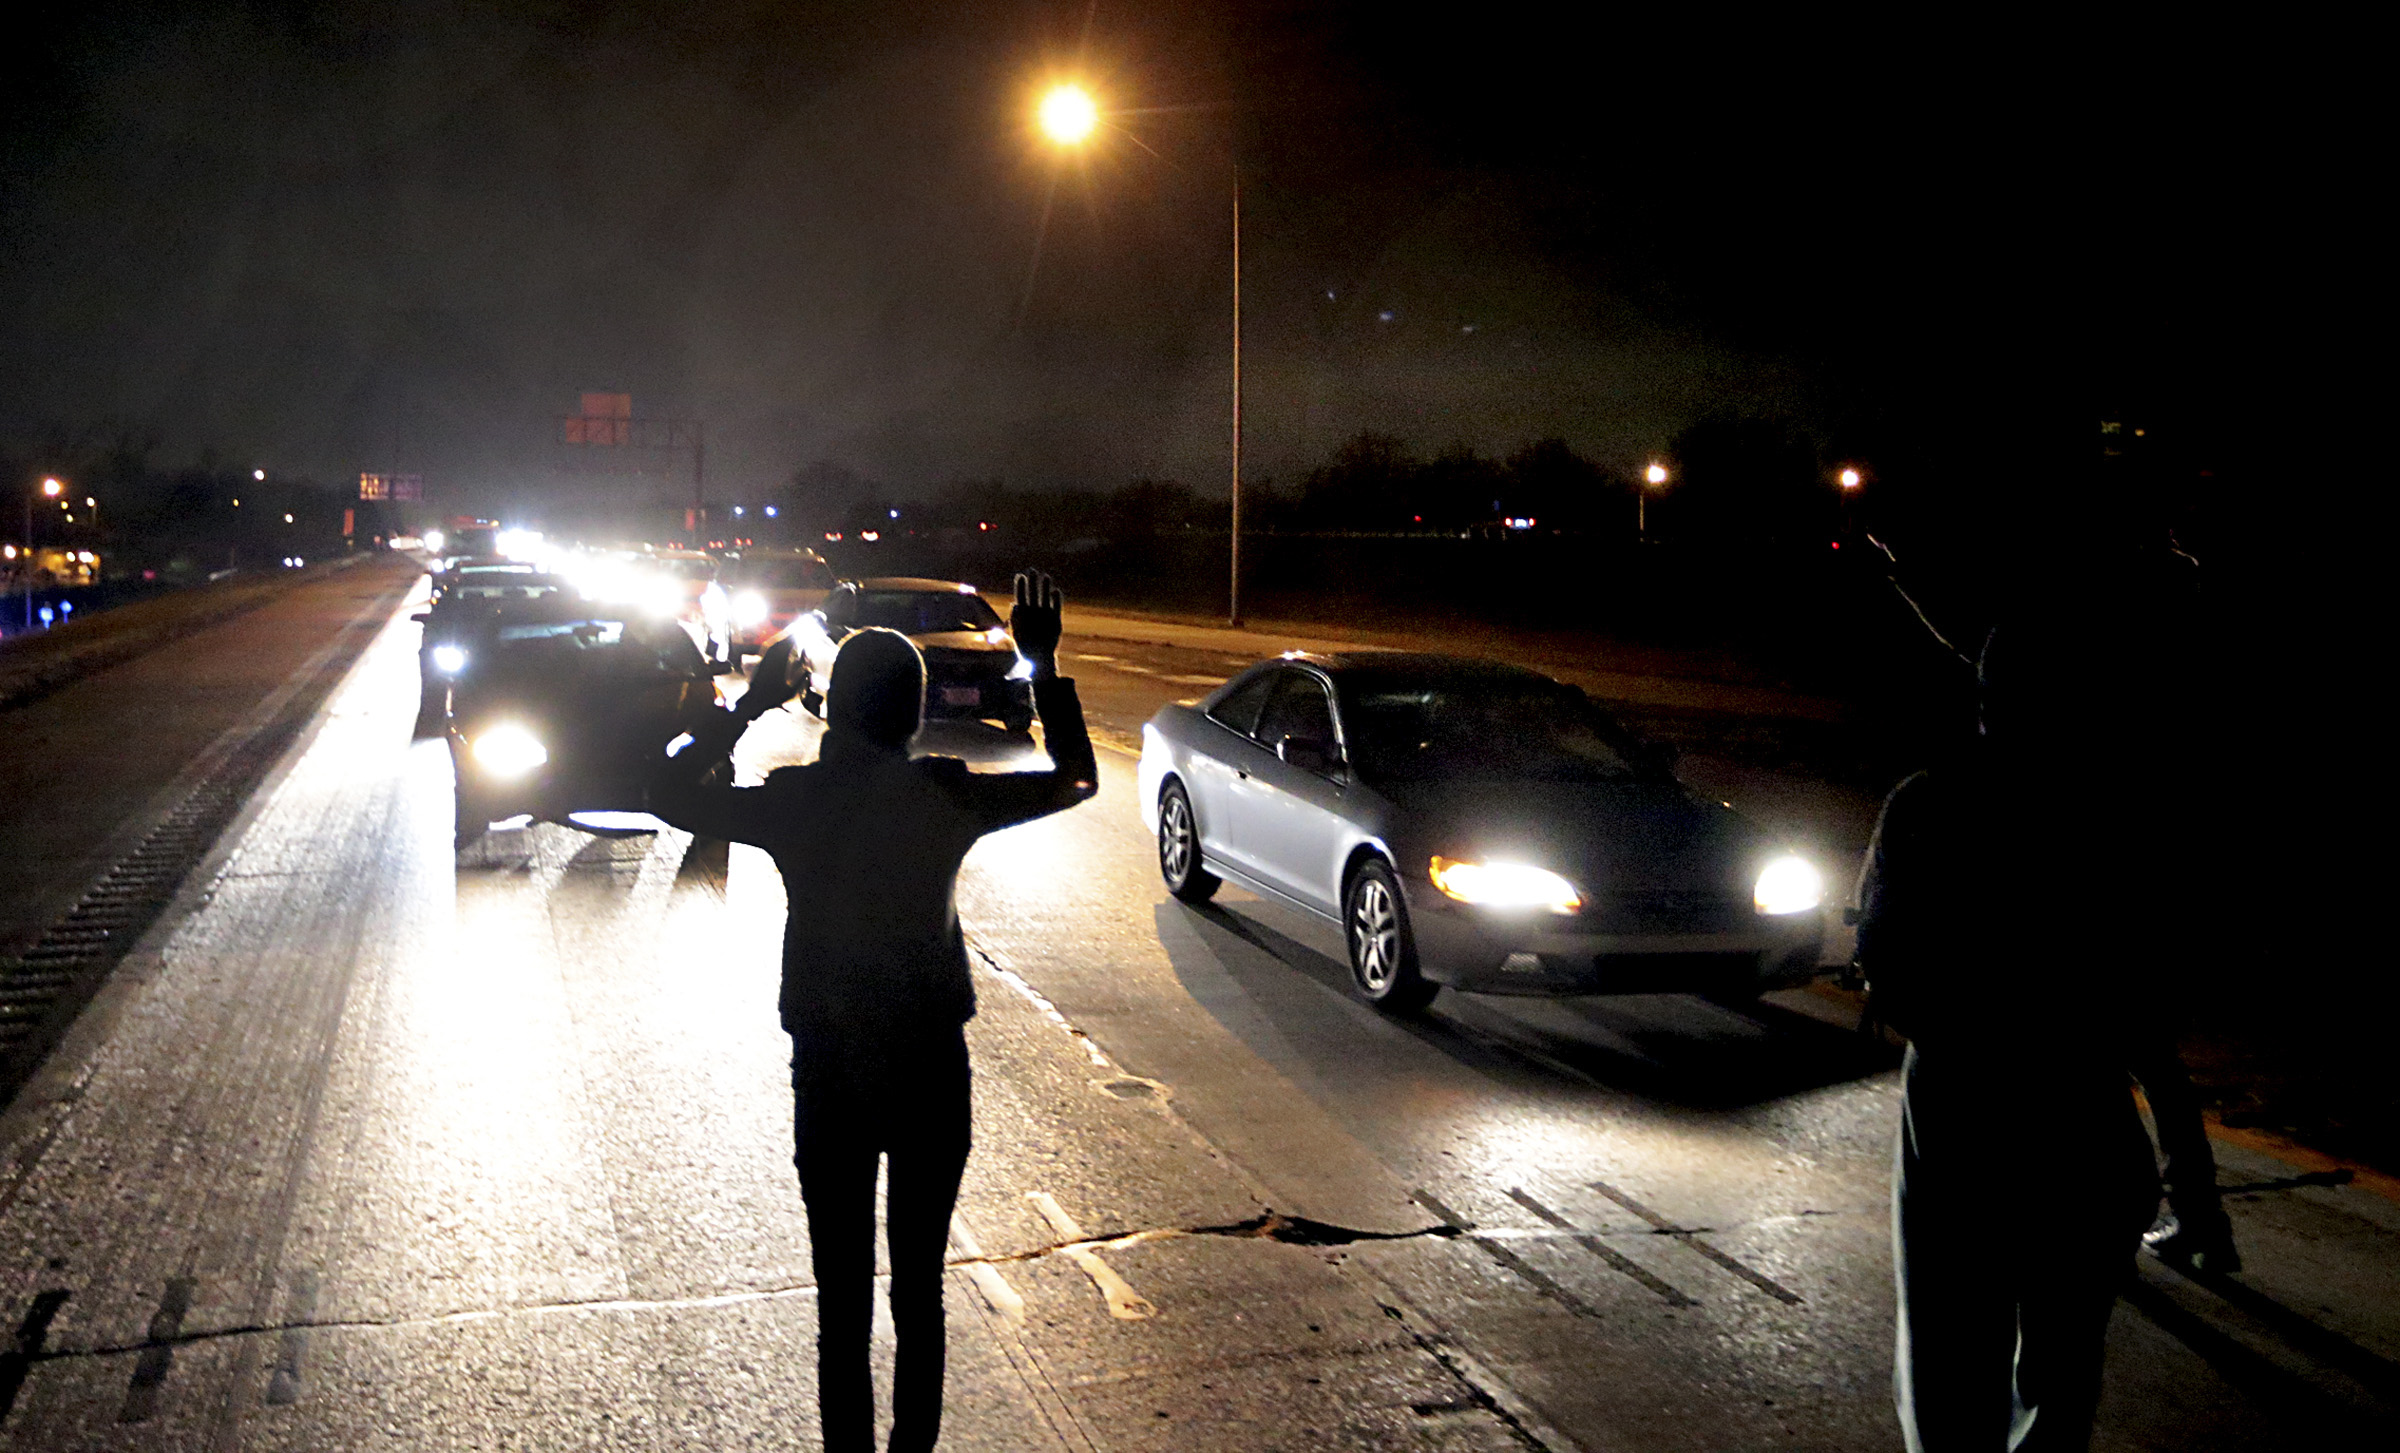 Protesters shut down an interstate at Airport Road on Dec. 24, 2014, in Berkeley, Mo. (Robert Cohen—St. Louis Post-Dispatch/AP)